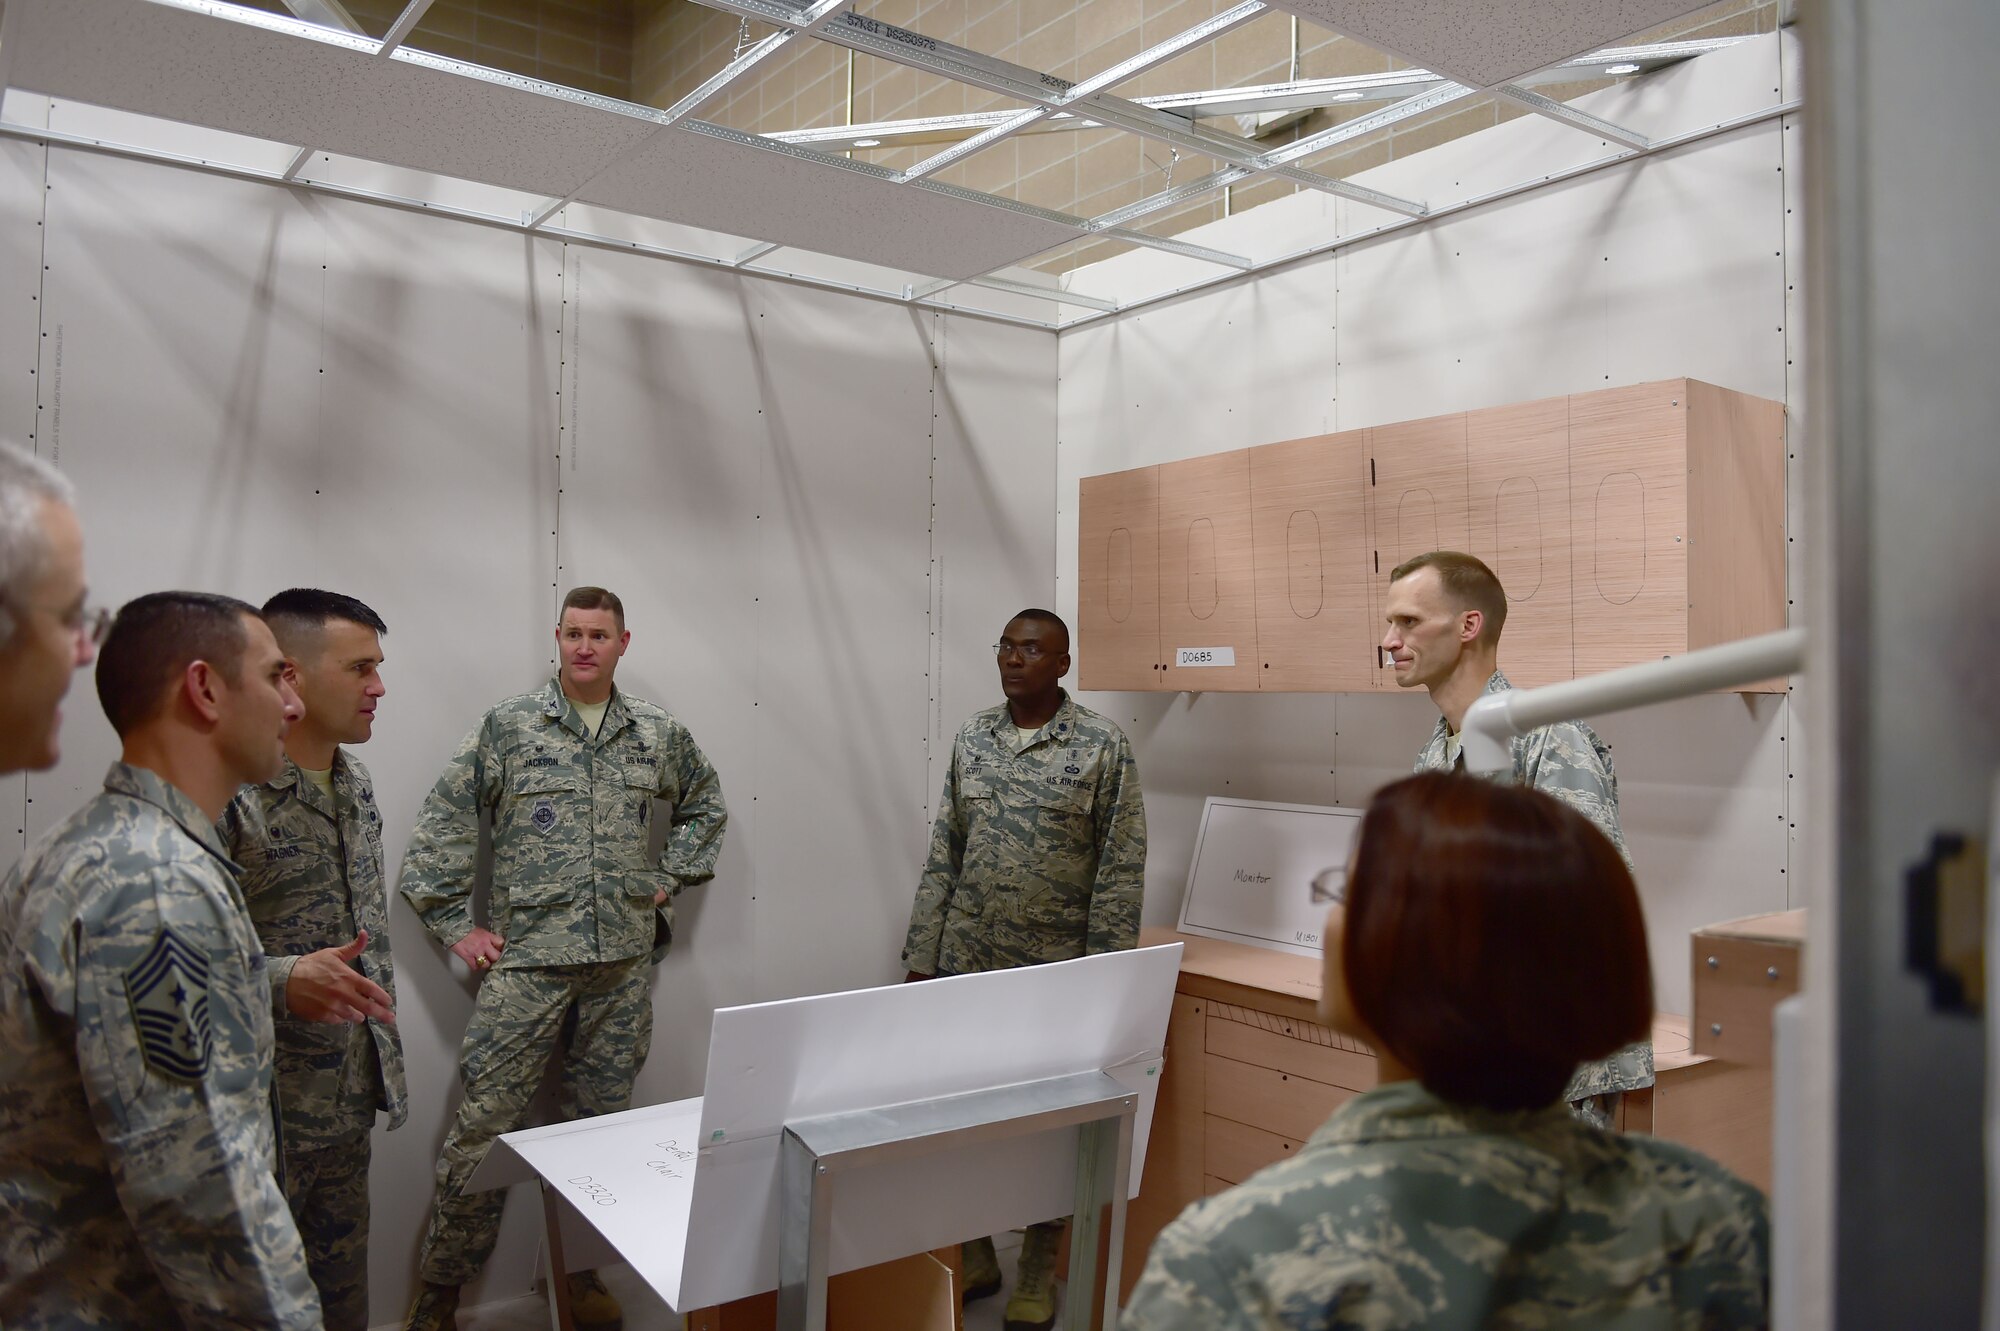 Buckley leadership tours mock dental clinic rooms Aug. 3, 2015, on Buckley Air Force Base, Colo. The expansion and reconfiguration of the 460th MDG and 140th MDG building is expected to be completed June 2016. (U.S. Air Force photo by Airman 1st Class Luke W. Nowakowski/Released)